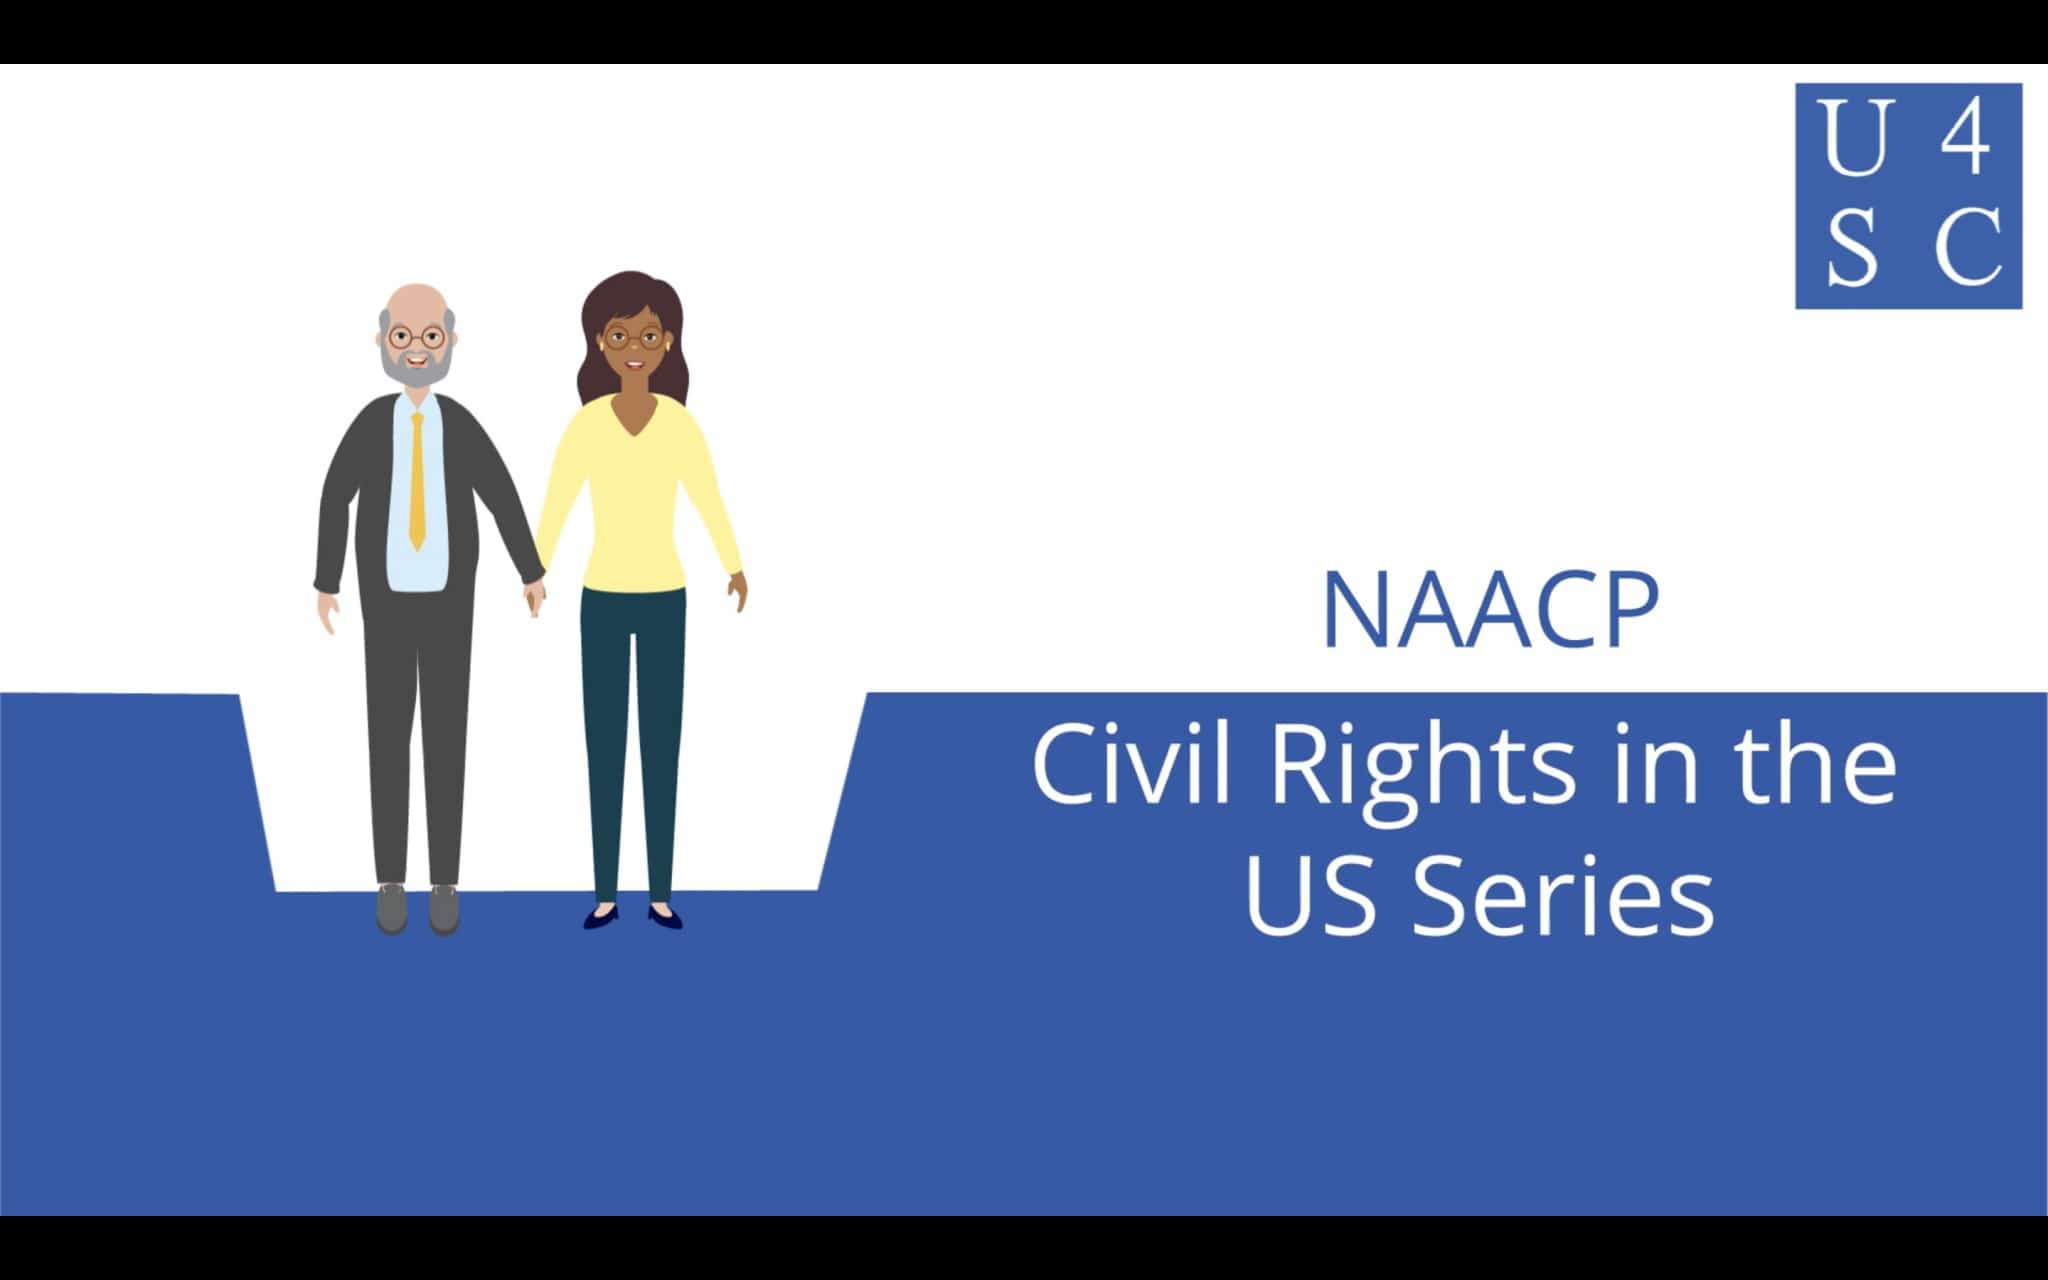 il class actio naacp commonality